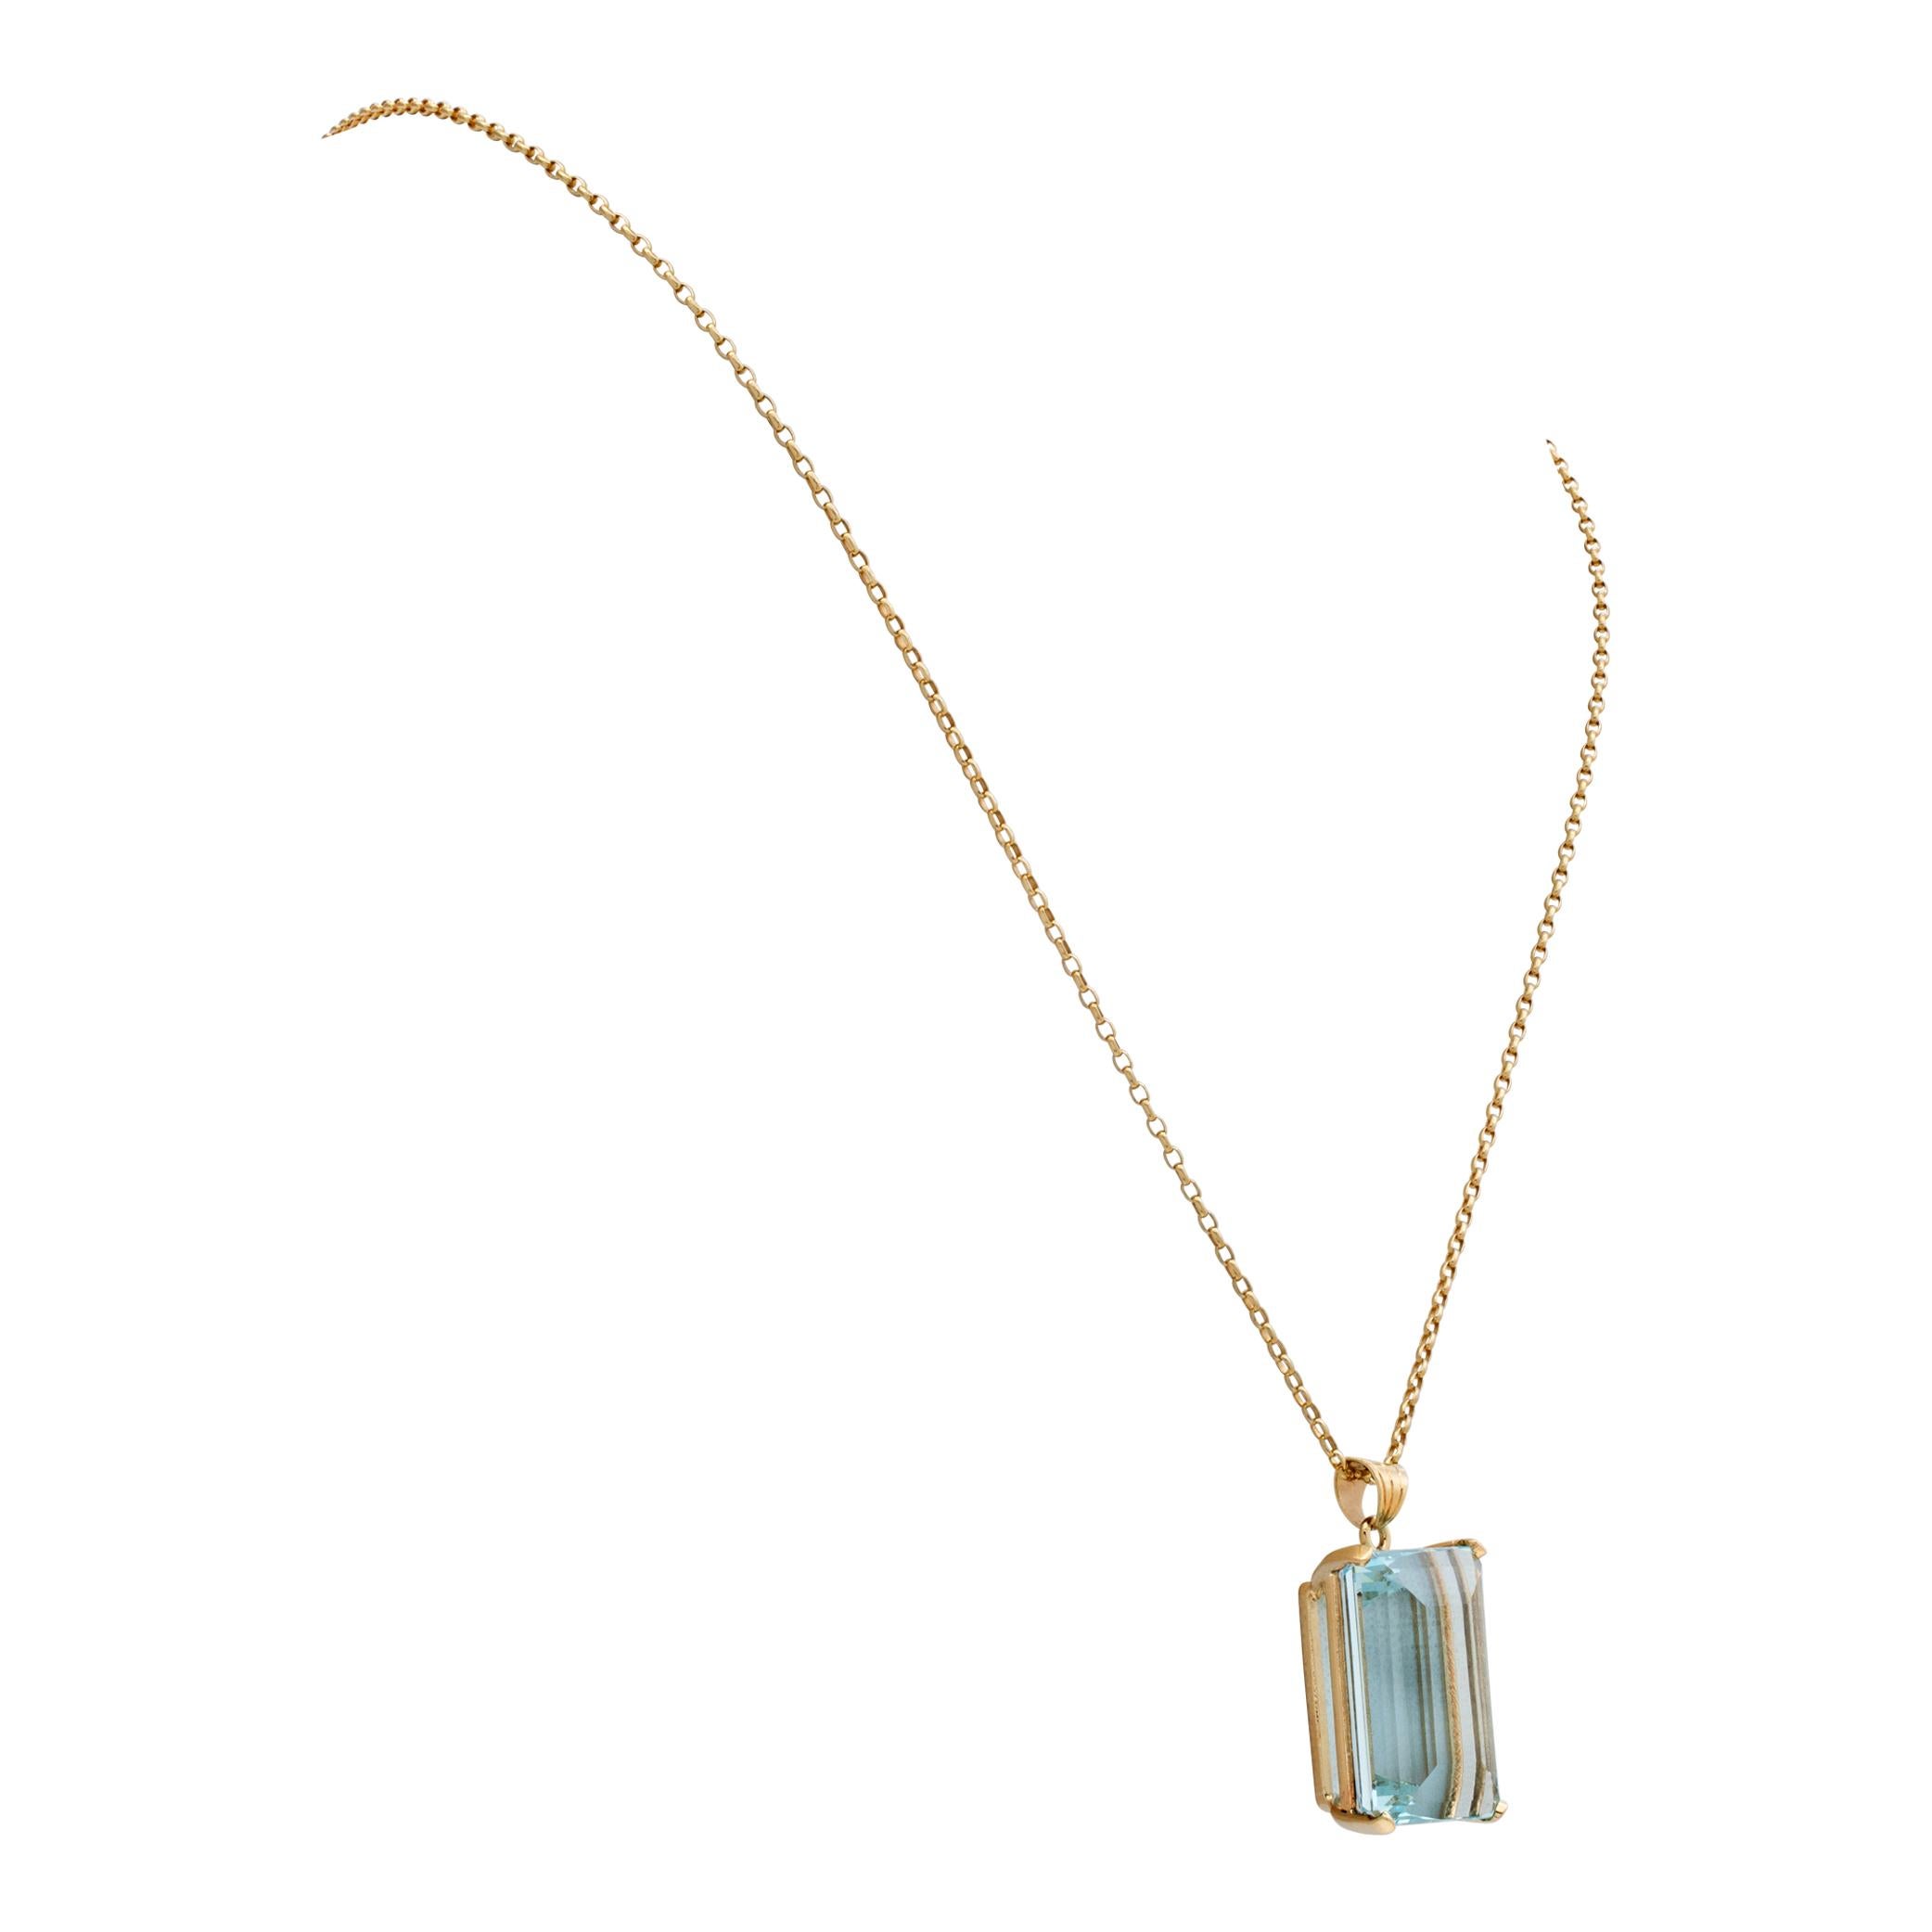 Emerald Aquamarine Pendant With 18k Gold Chain In Excellent Condition For Sale In Surfside, FL